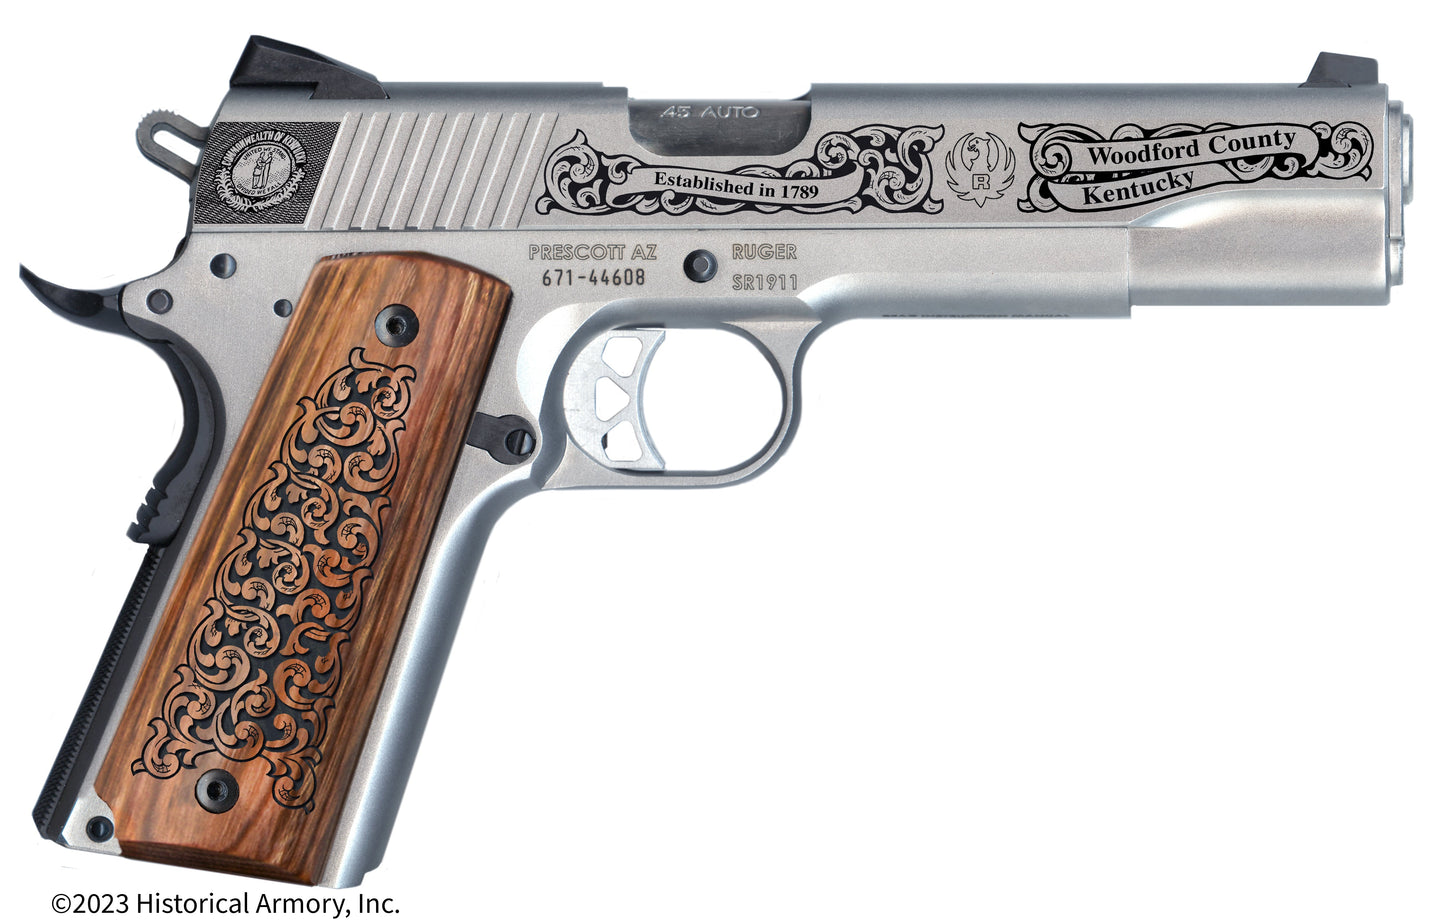 Woodford County Kentucky Engraved .45 Auto Ruger 1911